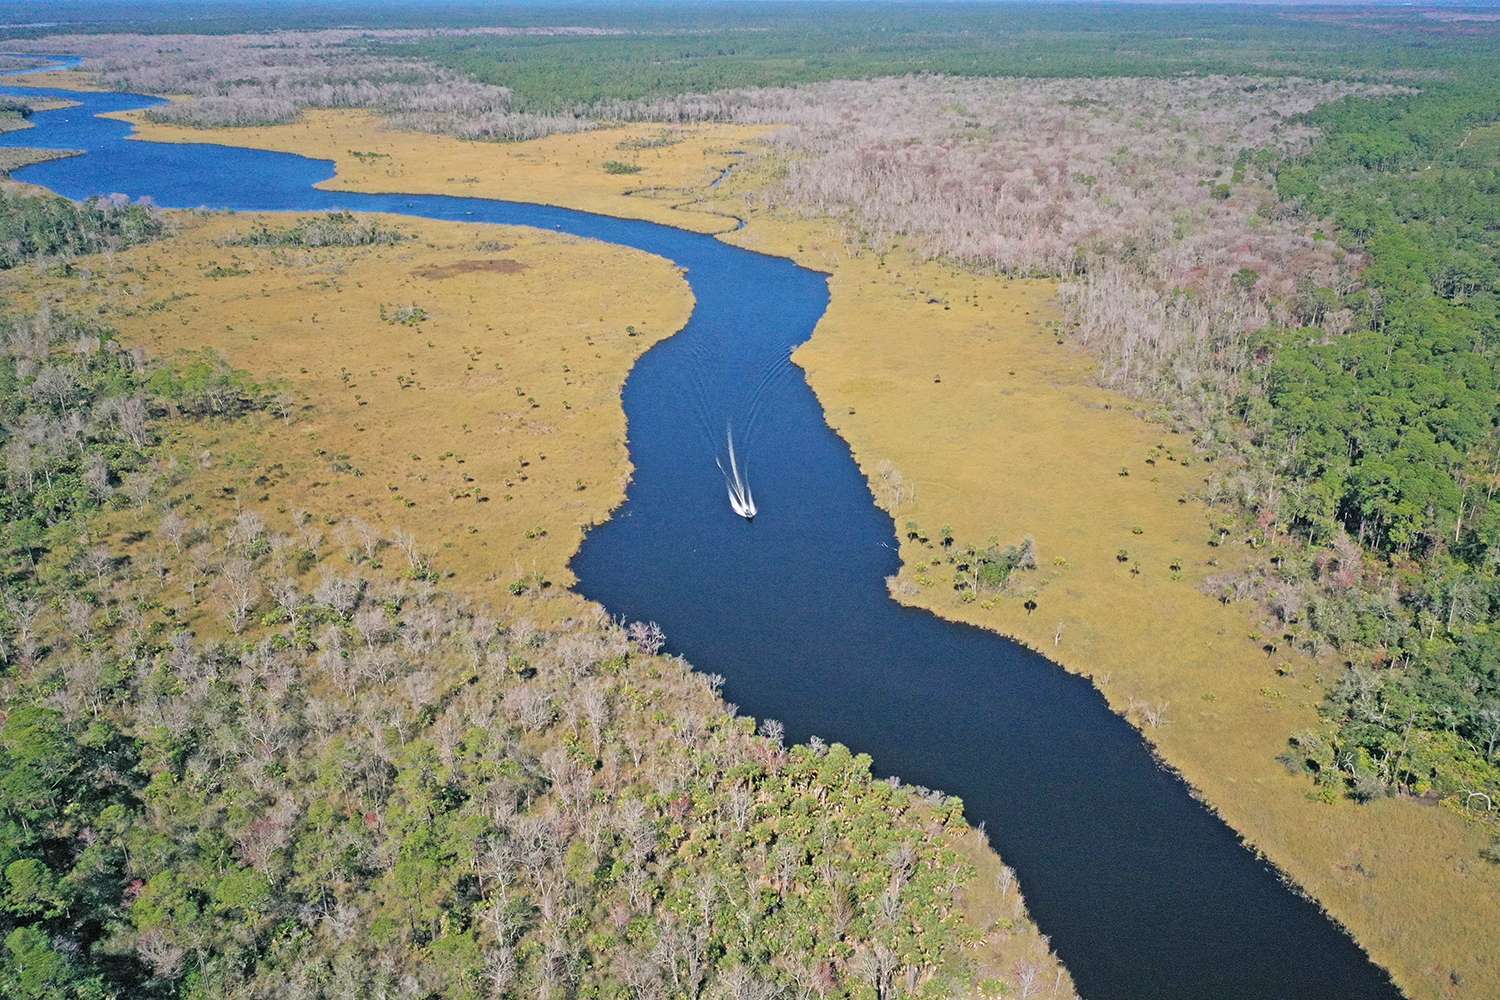 From its headwaters to estuary, the St. Johns River falls only 30 feet, or about 1 foot every 10 miles, making it one of the laziest rivers. The St. Johns is influenced by tides, which in times of low water can affect water levels 160 miles upstream.  